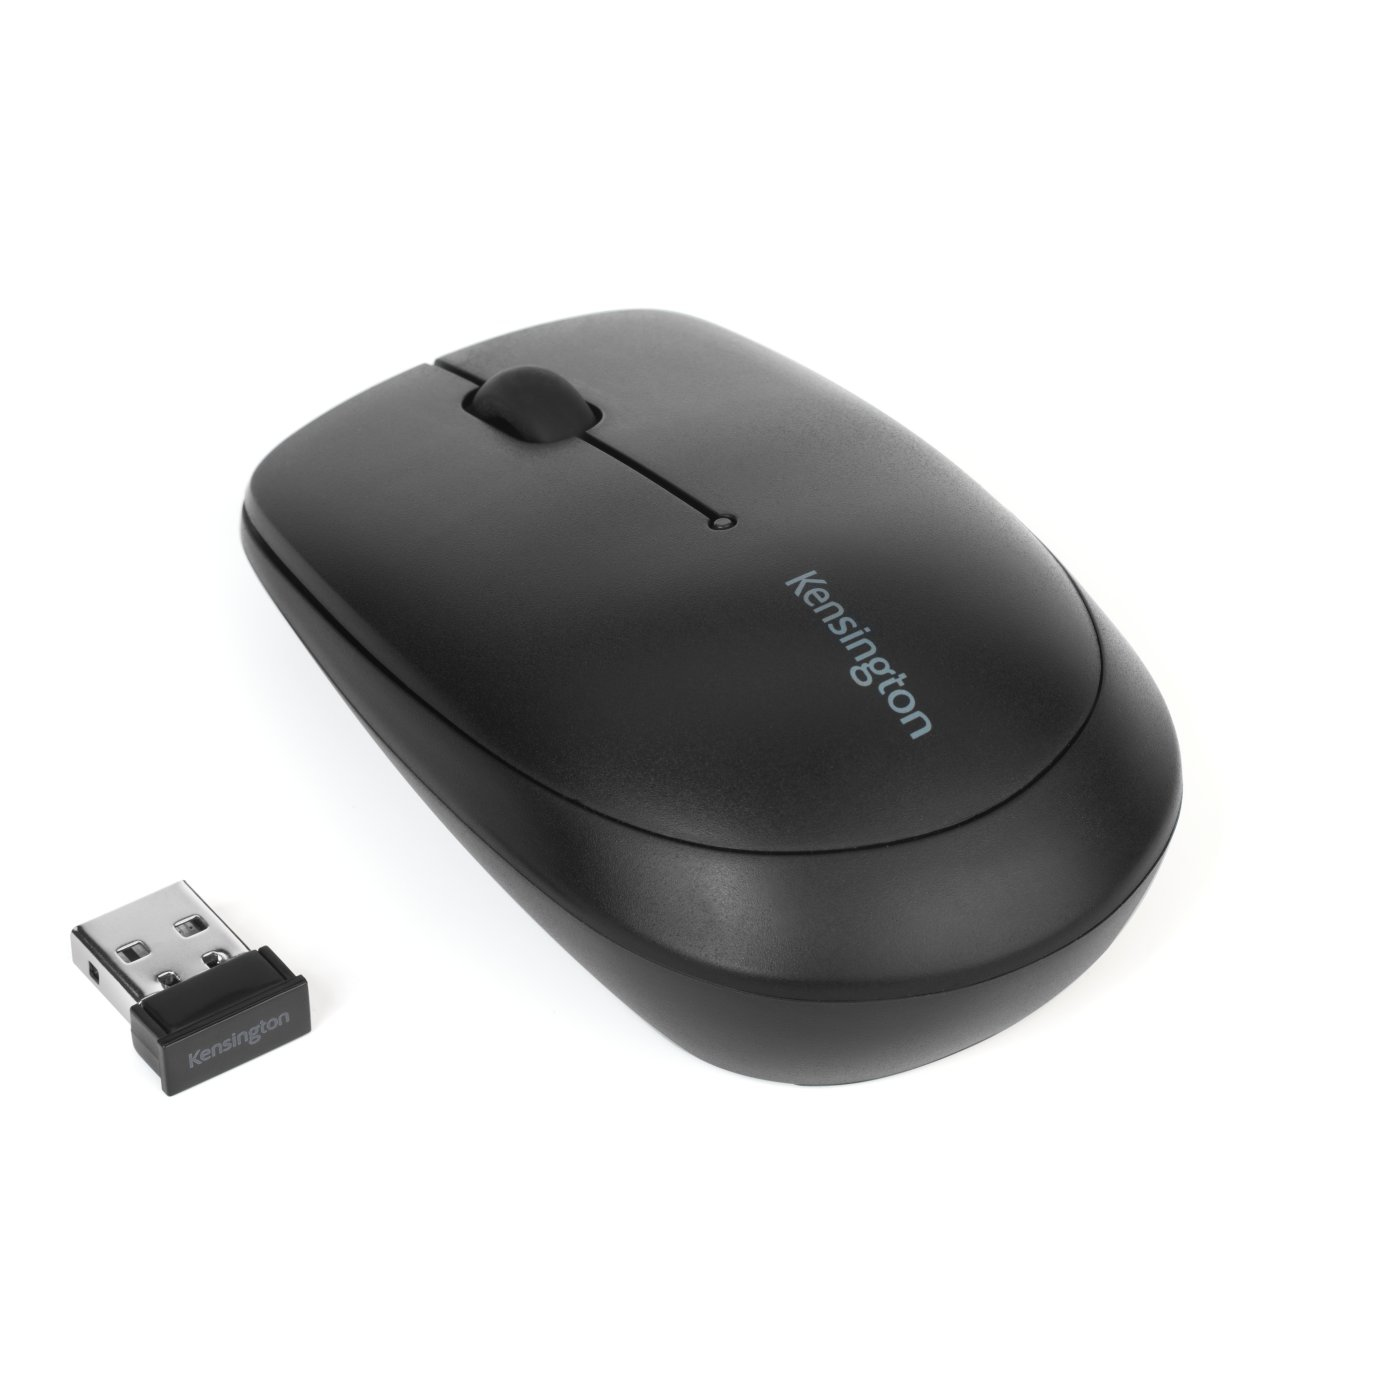 K75228WW KENSINGTON 2.4GHZ WIRELESS CONNECTION ALLOWS FOR COMPLETE FREEDOM AND MOBILITY,1000 DPI LAS